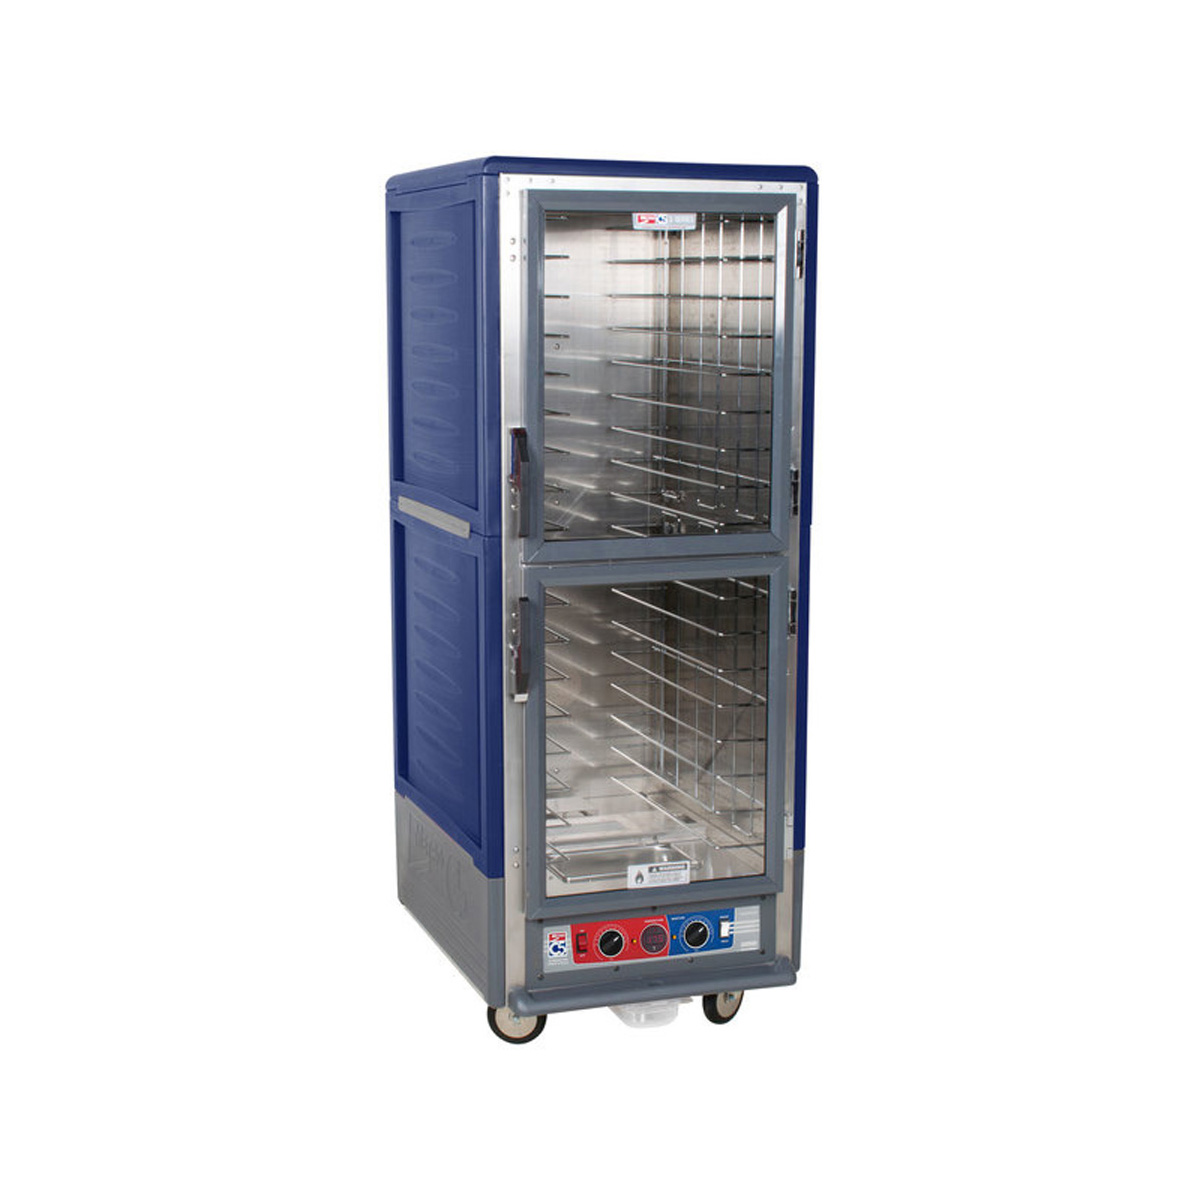 Metro C539-CLDC-4-BU C5 3 Series Mobile Heated Proofing and Holding Cabinet